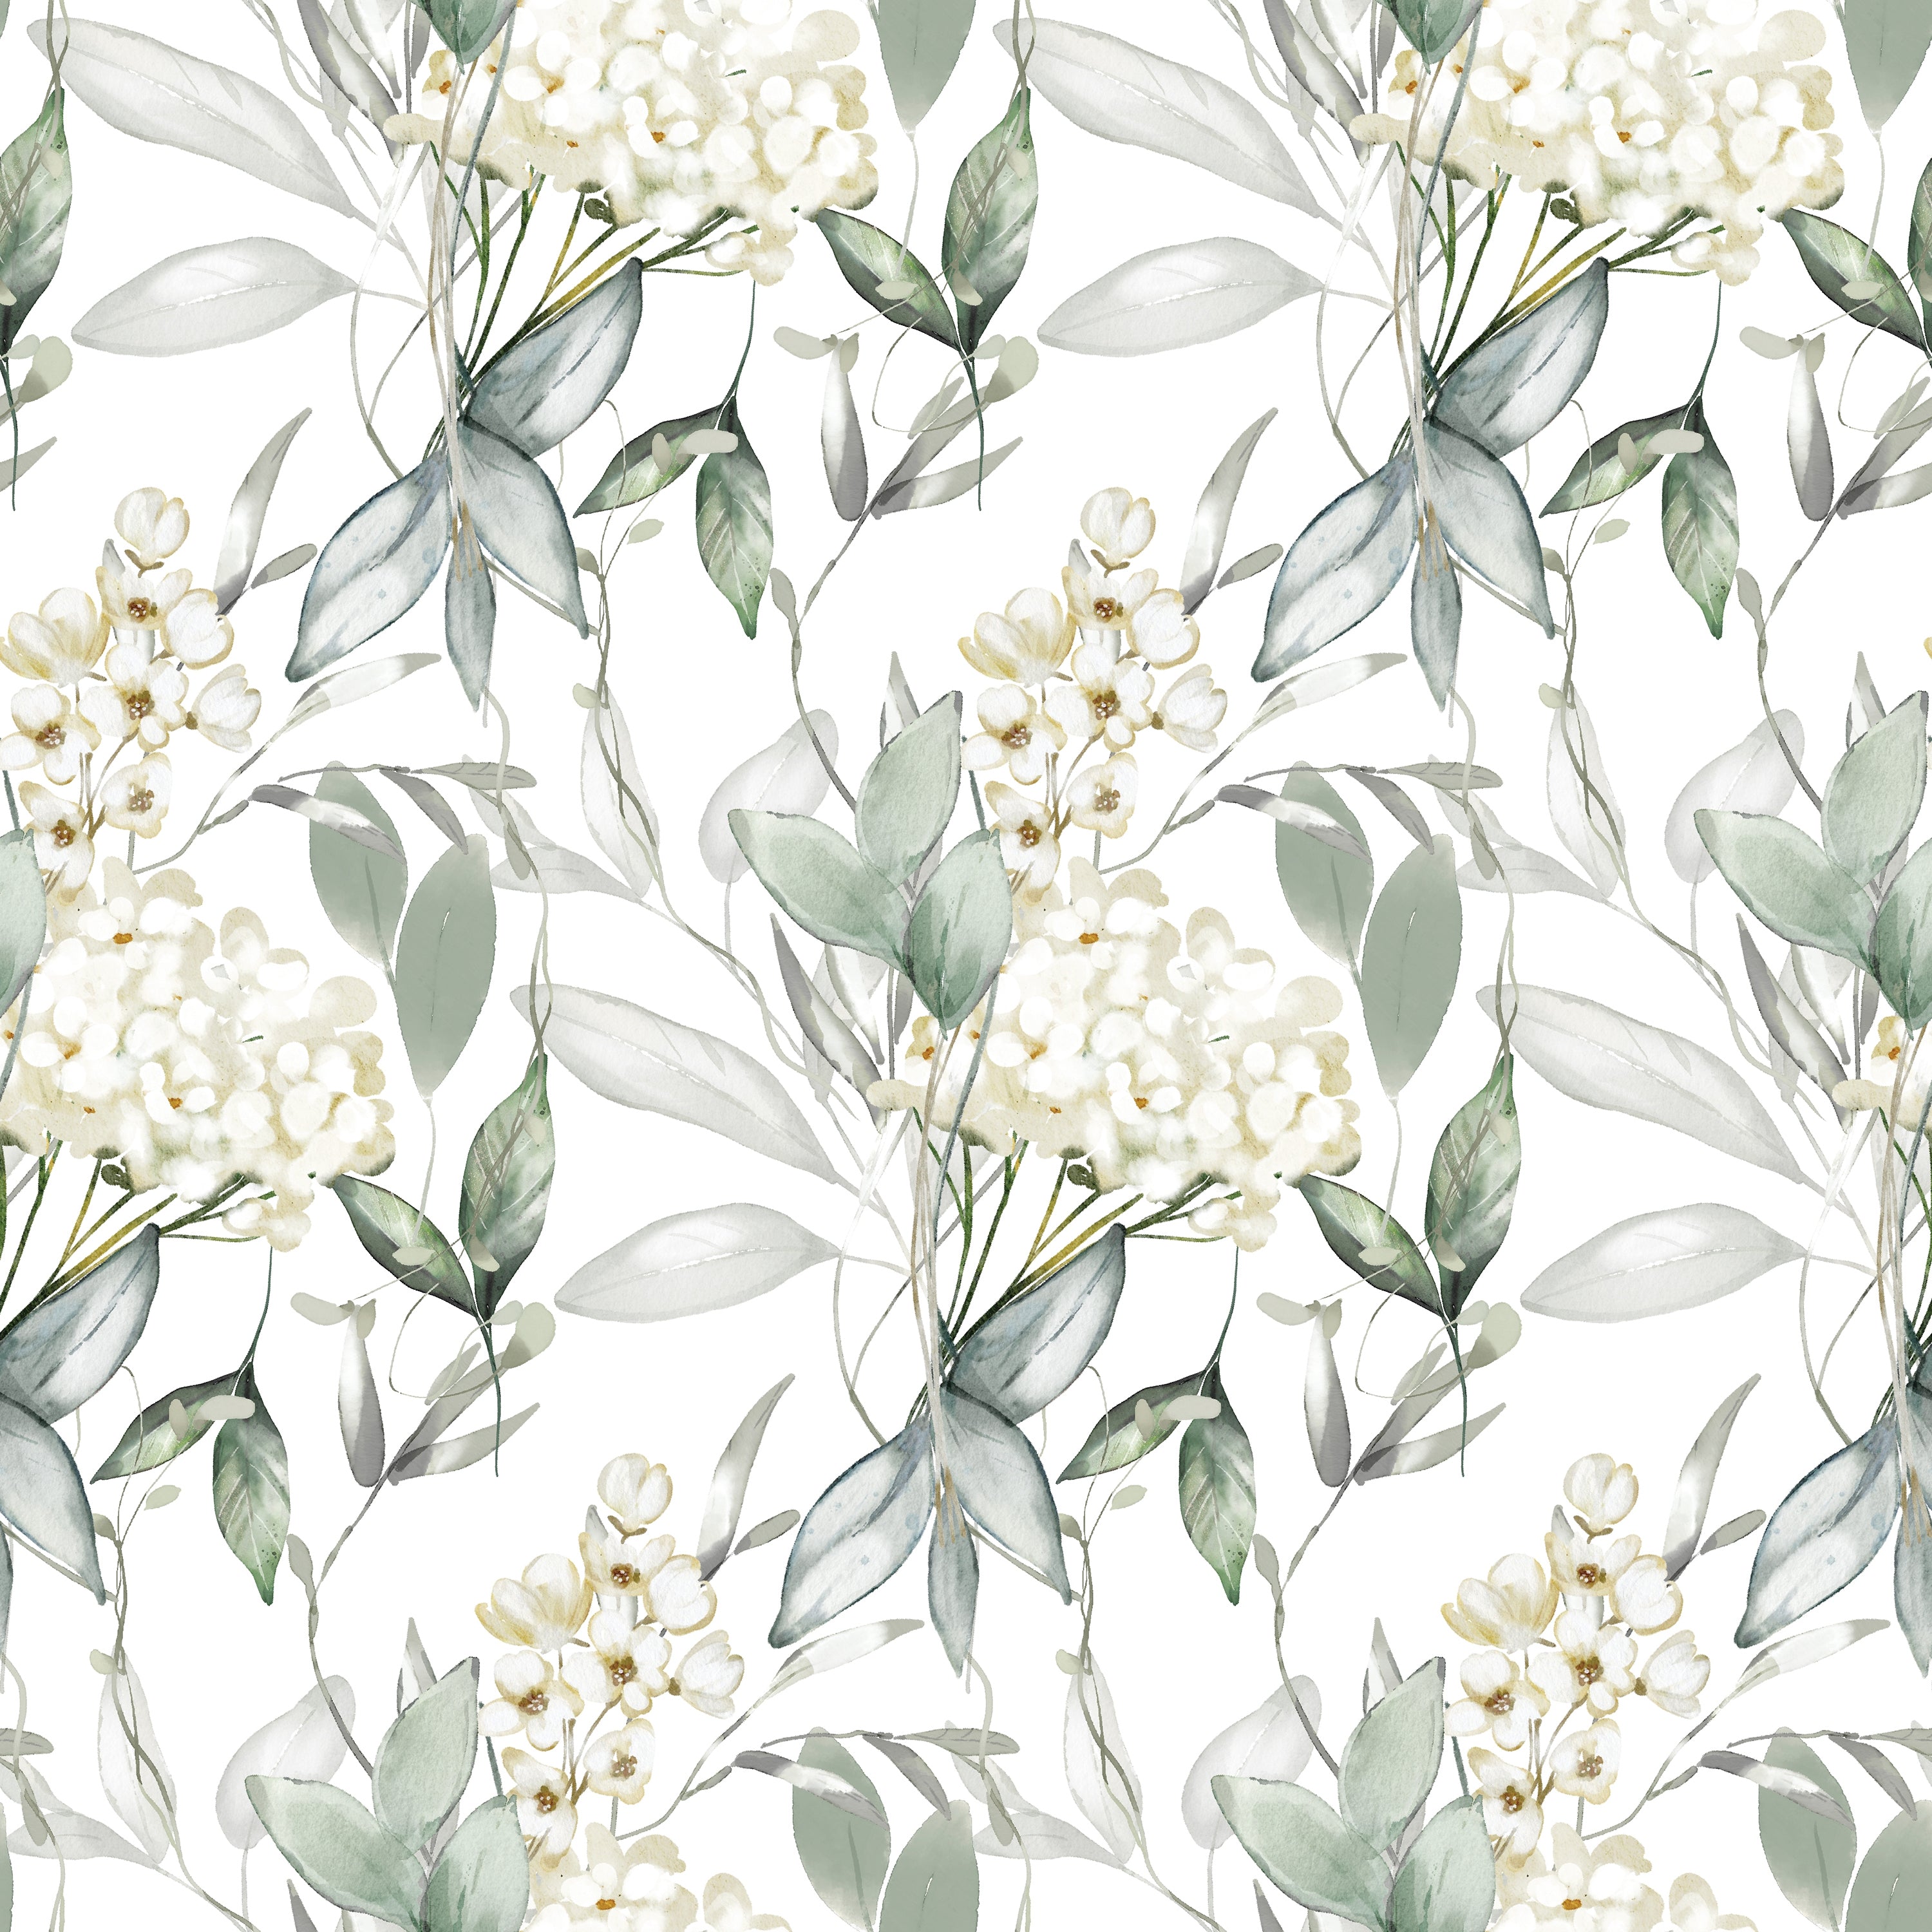 Close-up of the Heavenly Hydrangea wallpaper pattern. The design features detailed white hydrangea flowers interspersed with soft green and gray leaves, creating a fresh and serene floral motif